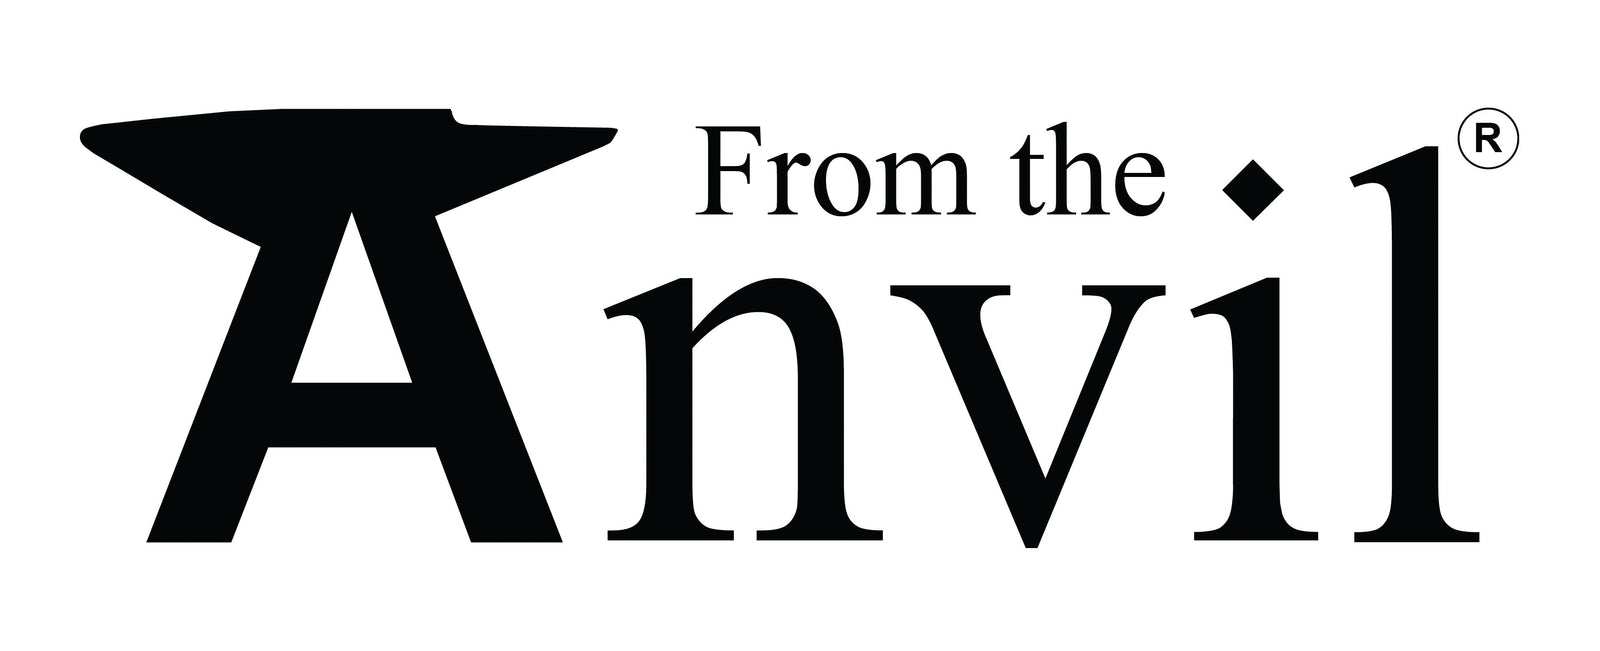 Image showing the From The Anvil Logo